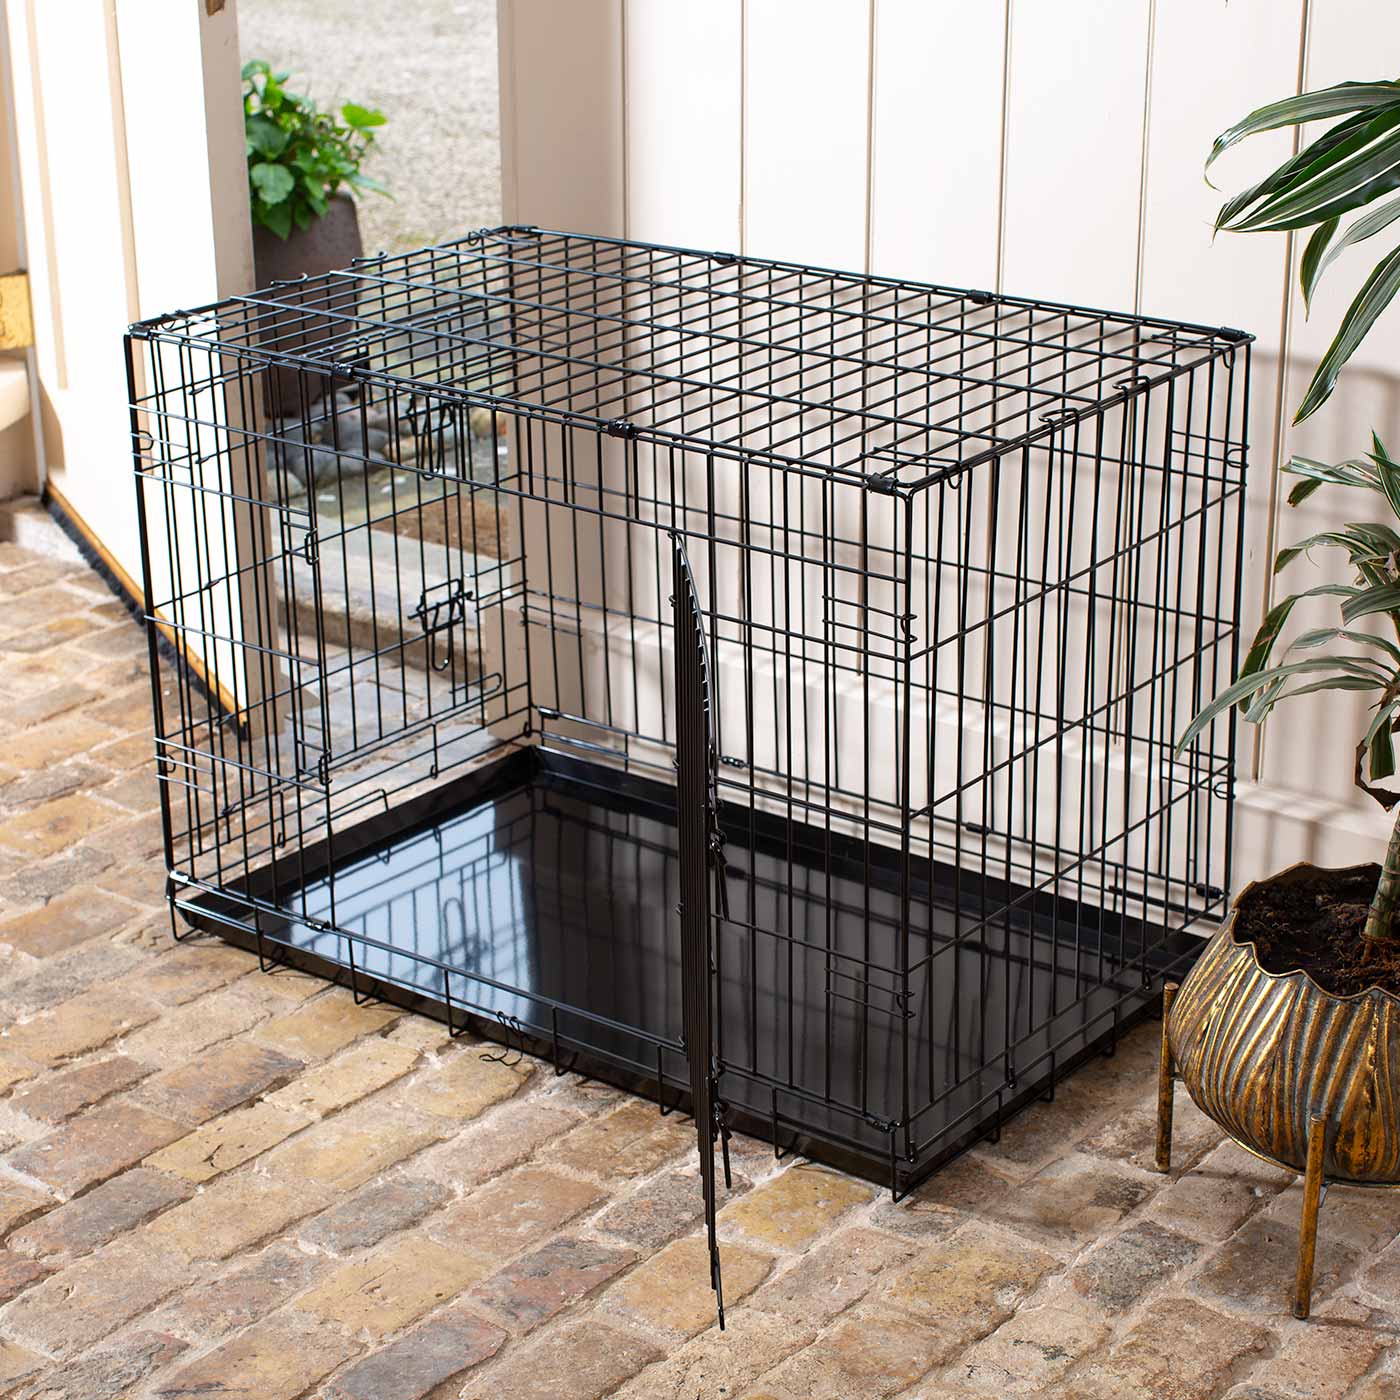 Discover the perfect deluxe heavy duty Black dog cage, featuring two doors for easy access and a removable tray for easy cleaning! The ideal choice to keep new puppies safe, made using pet safe galvanised steel! Available now in 5 sizes and three stunning colors at Lords & Labradors US